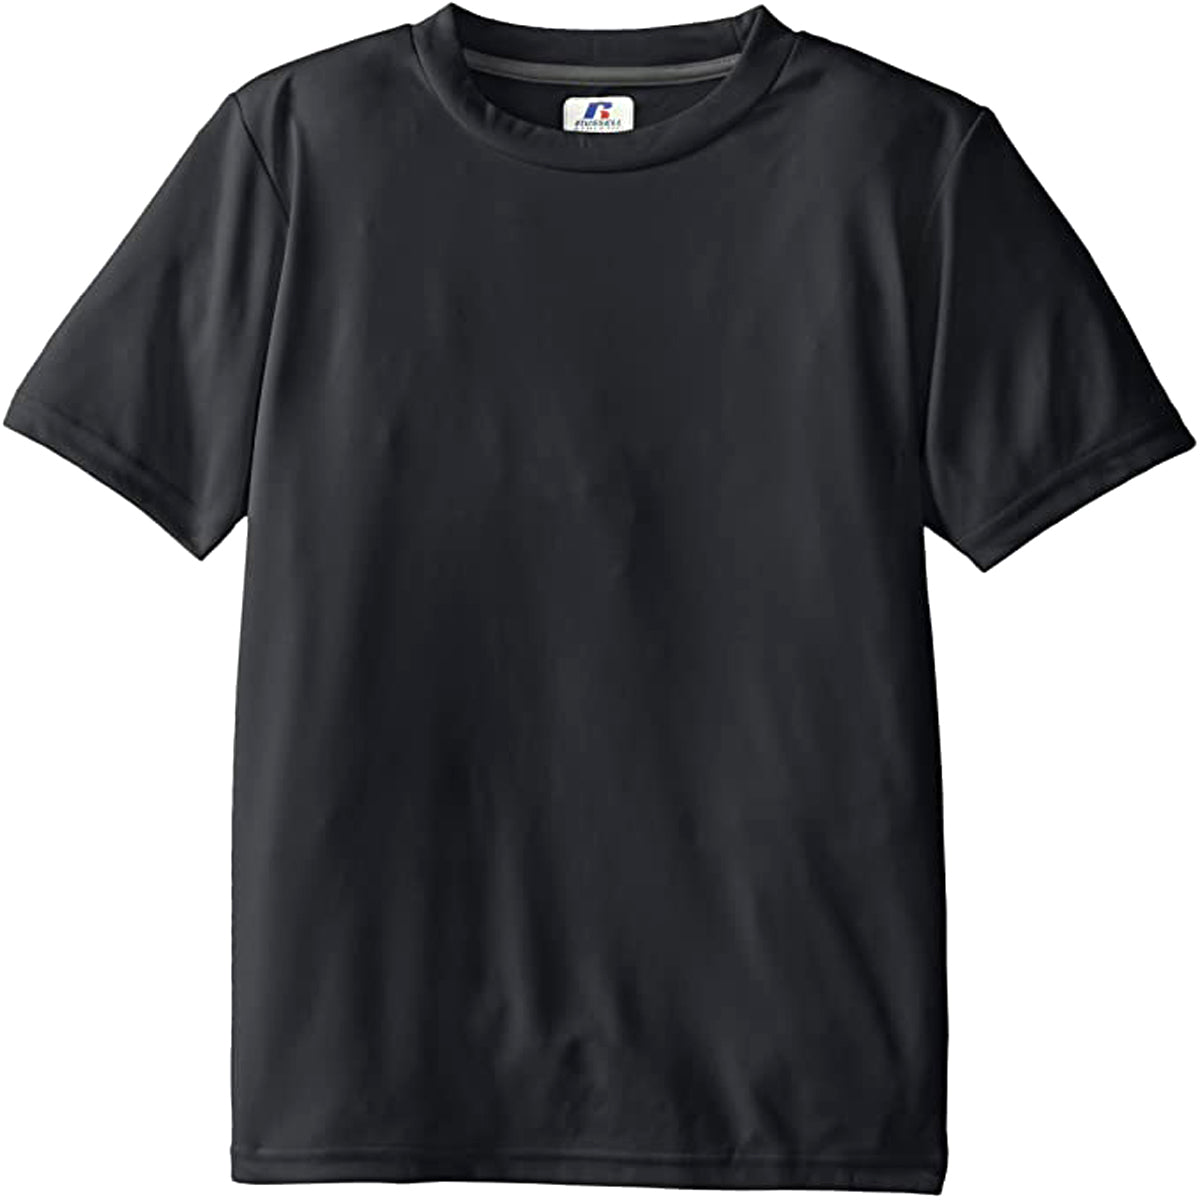 Russell Athletic Youth Short-Sleeve Cotton T-Shirt | 94030BK Apparel Russell Athletic Youth Small Black 